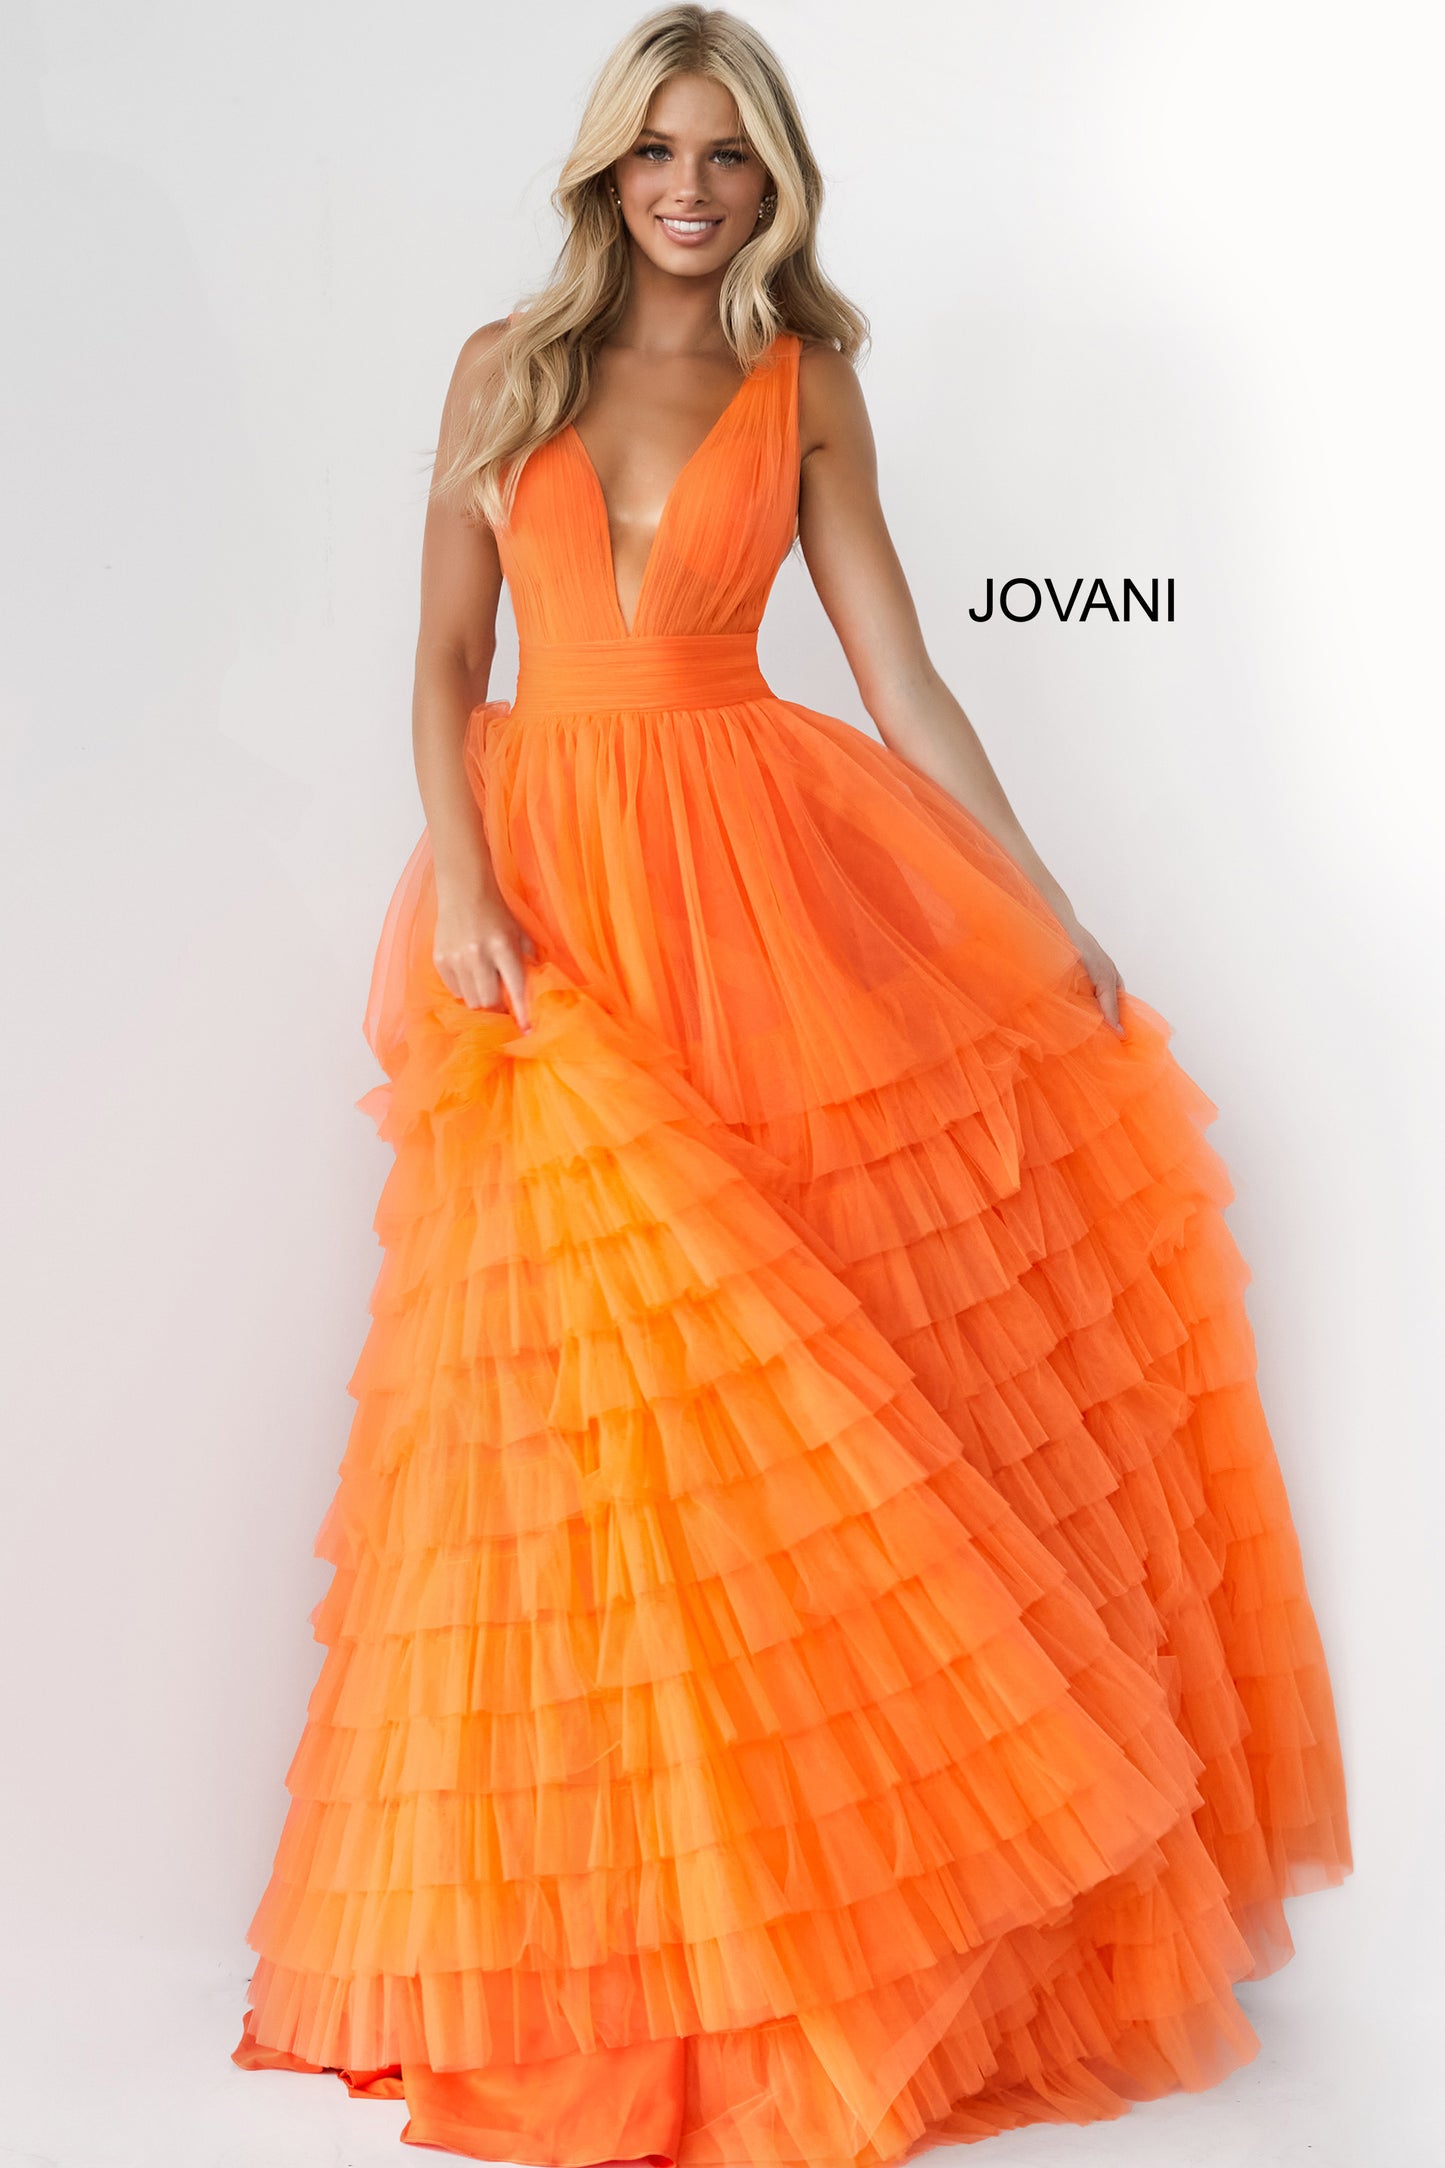 Jovani 07264 Long Ballgown Prom Pageant Gown ruffle dress v neck   Available Size-00-24  Available Color- Orange, Blush, Lilac, White